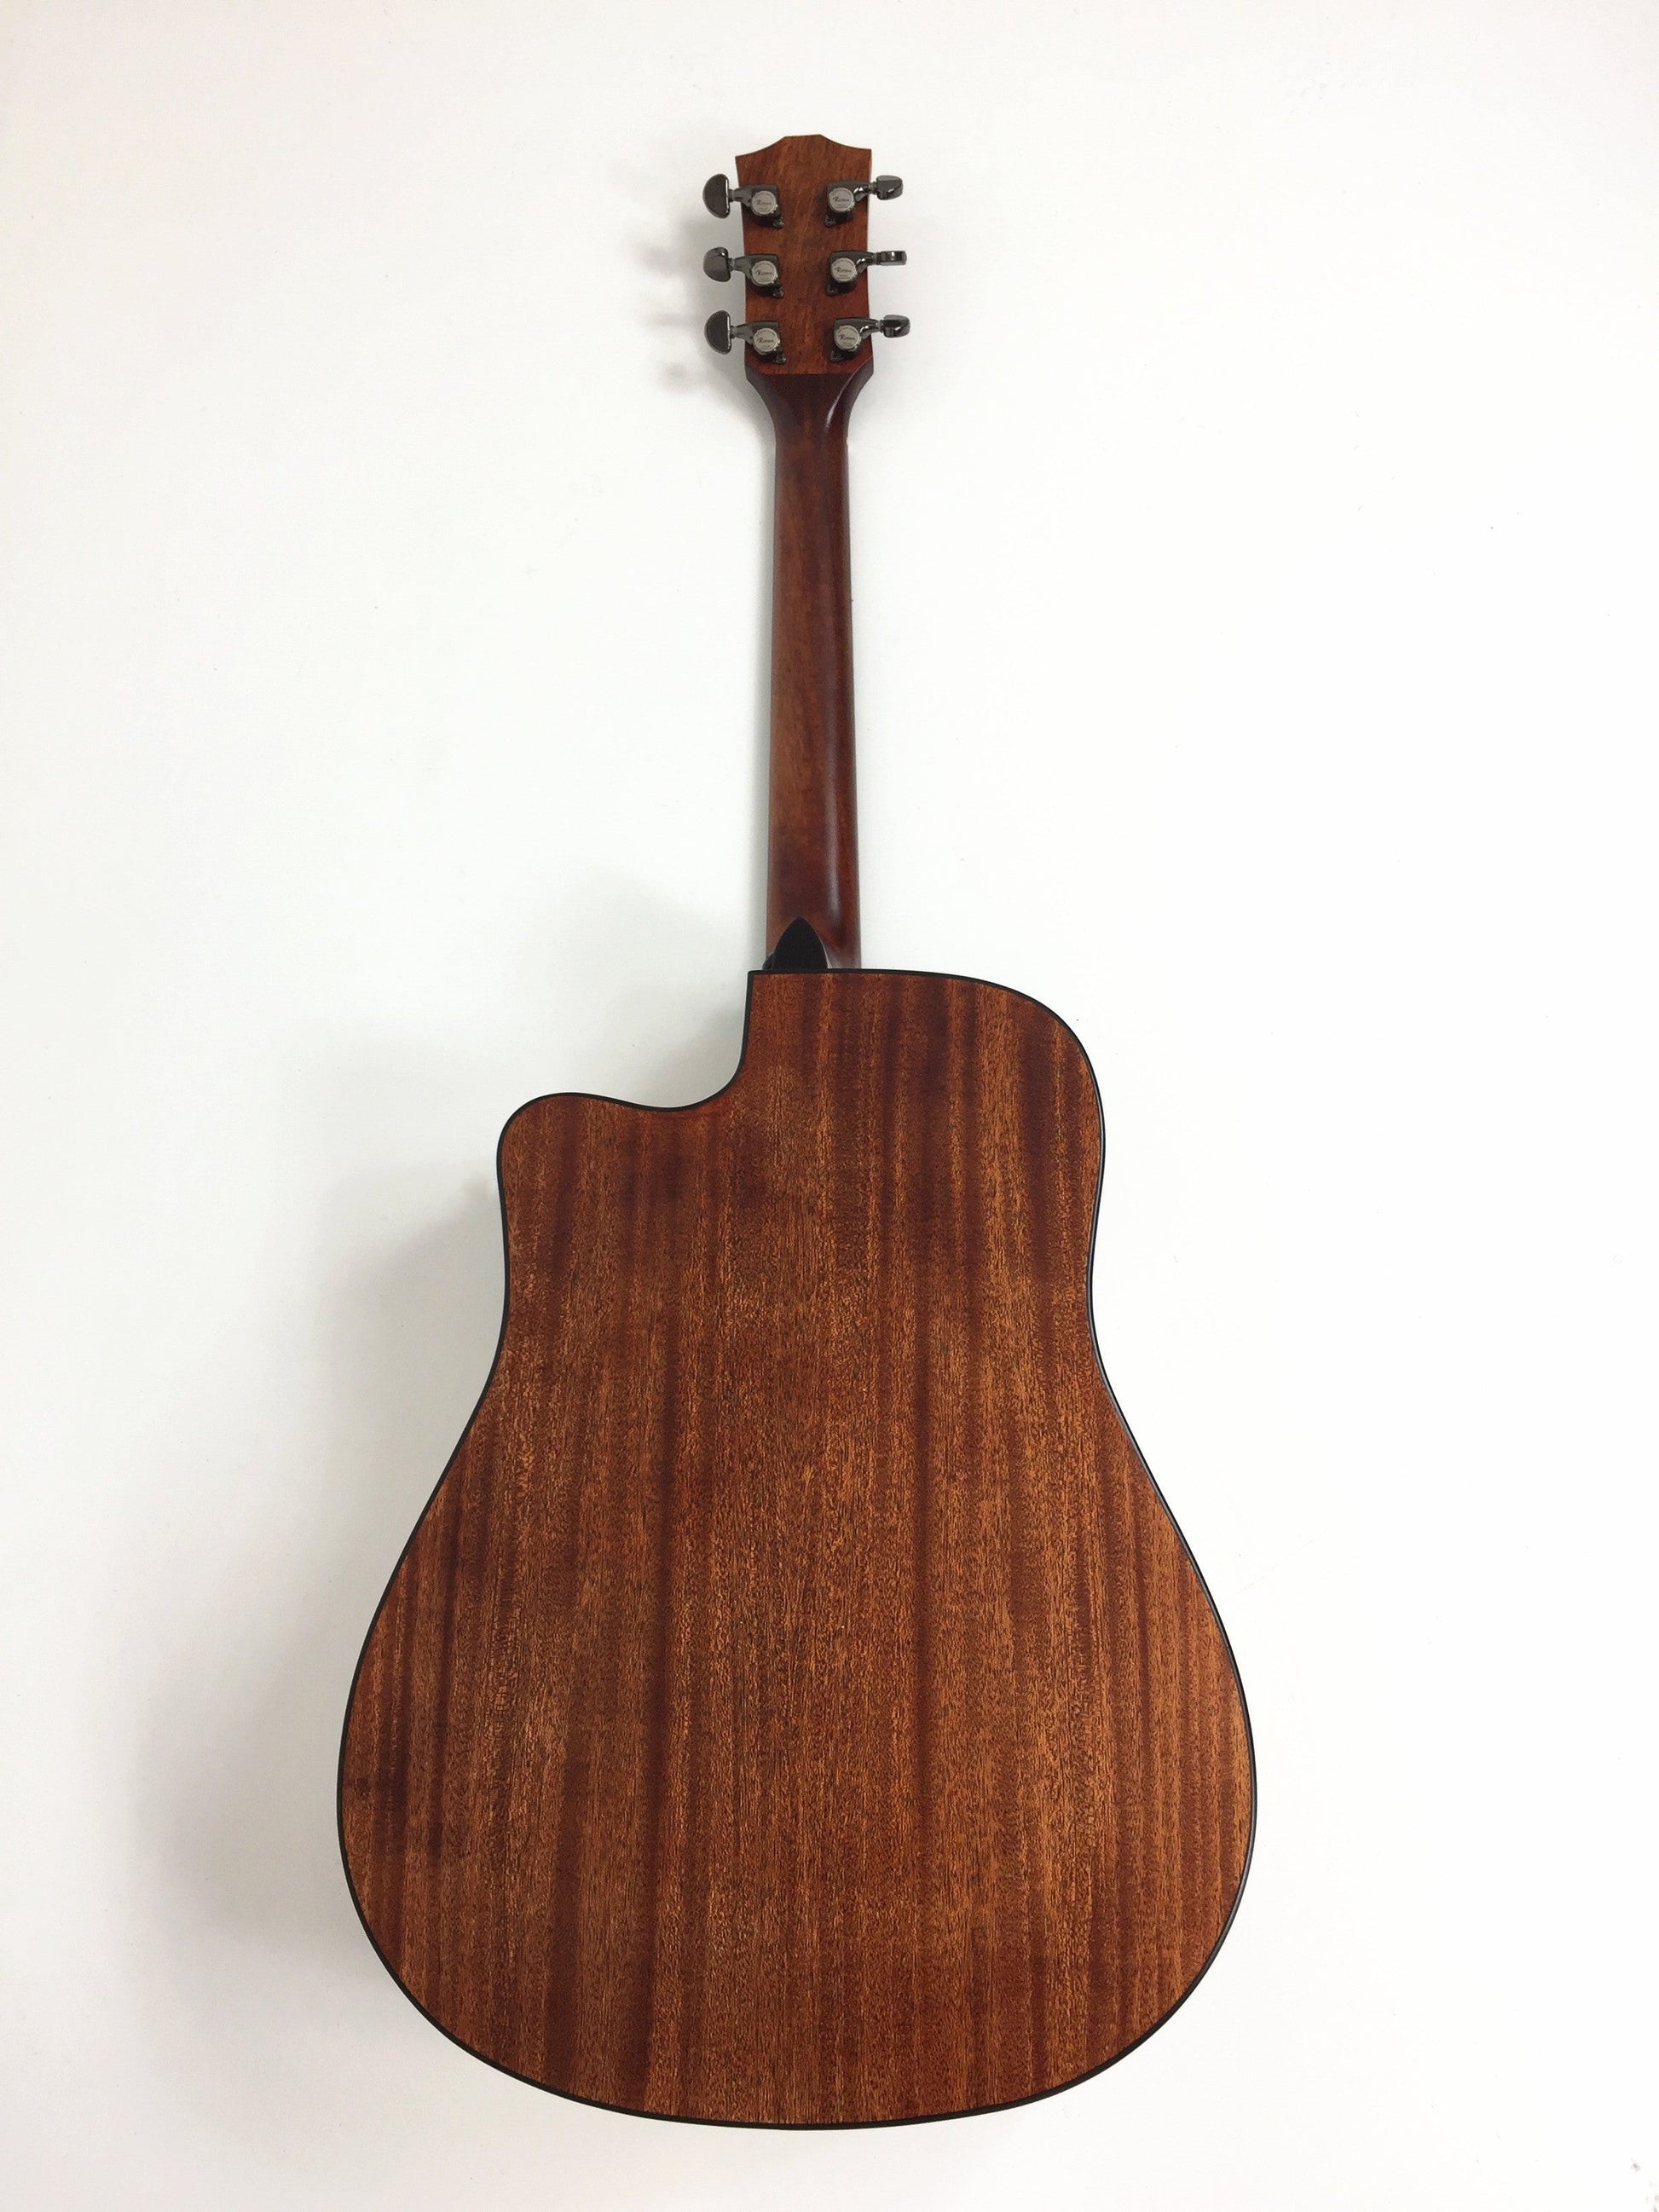 Rosen Solid Spruce Top Dreadnought Cutaway ECO. Rosewood Fingerboard Acoustic Guitar - Natural G15CN